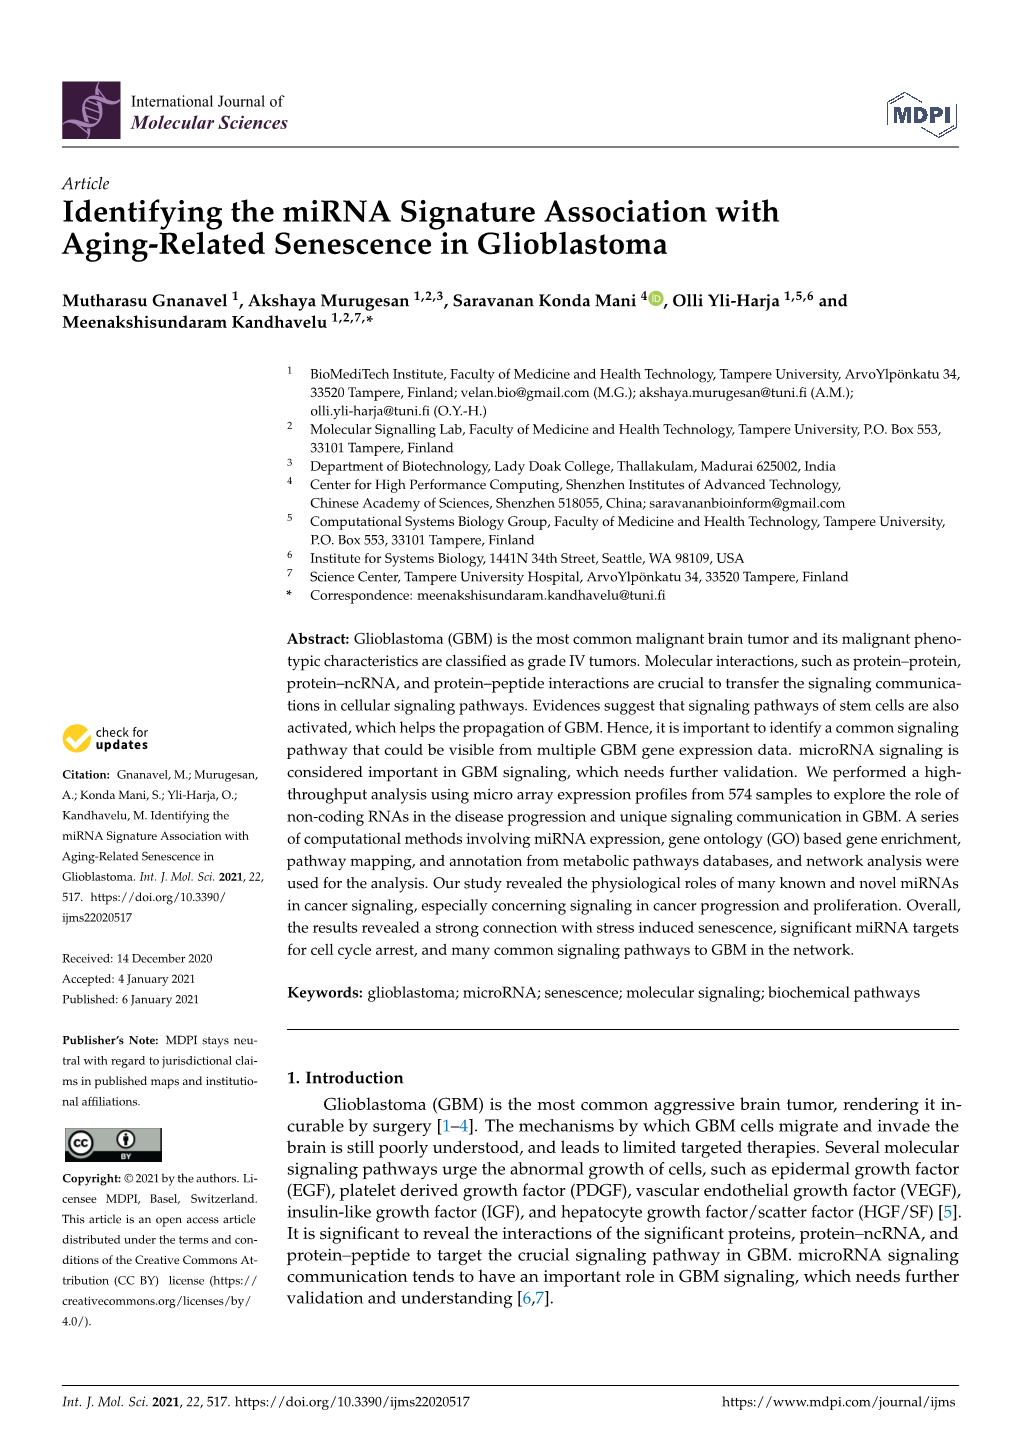 Identifying the Mirna Signature Association with Aging-Related Senescence in Glioblastoma